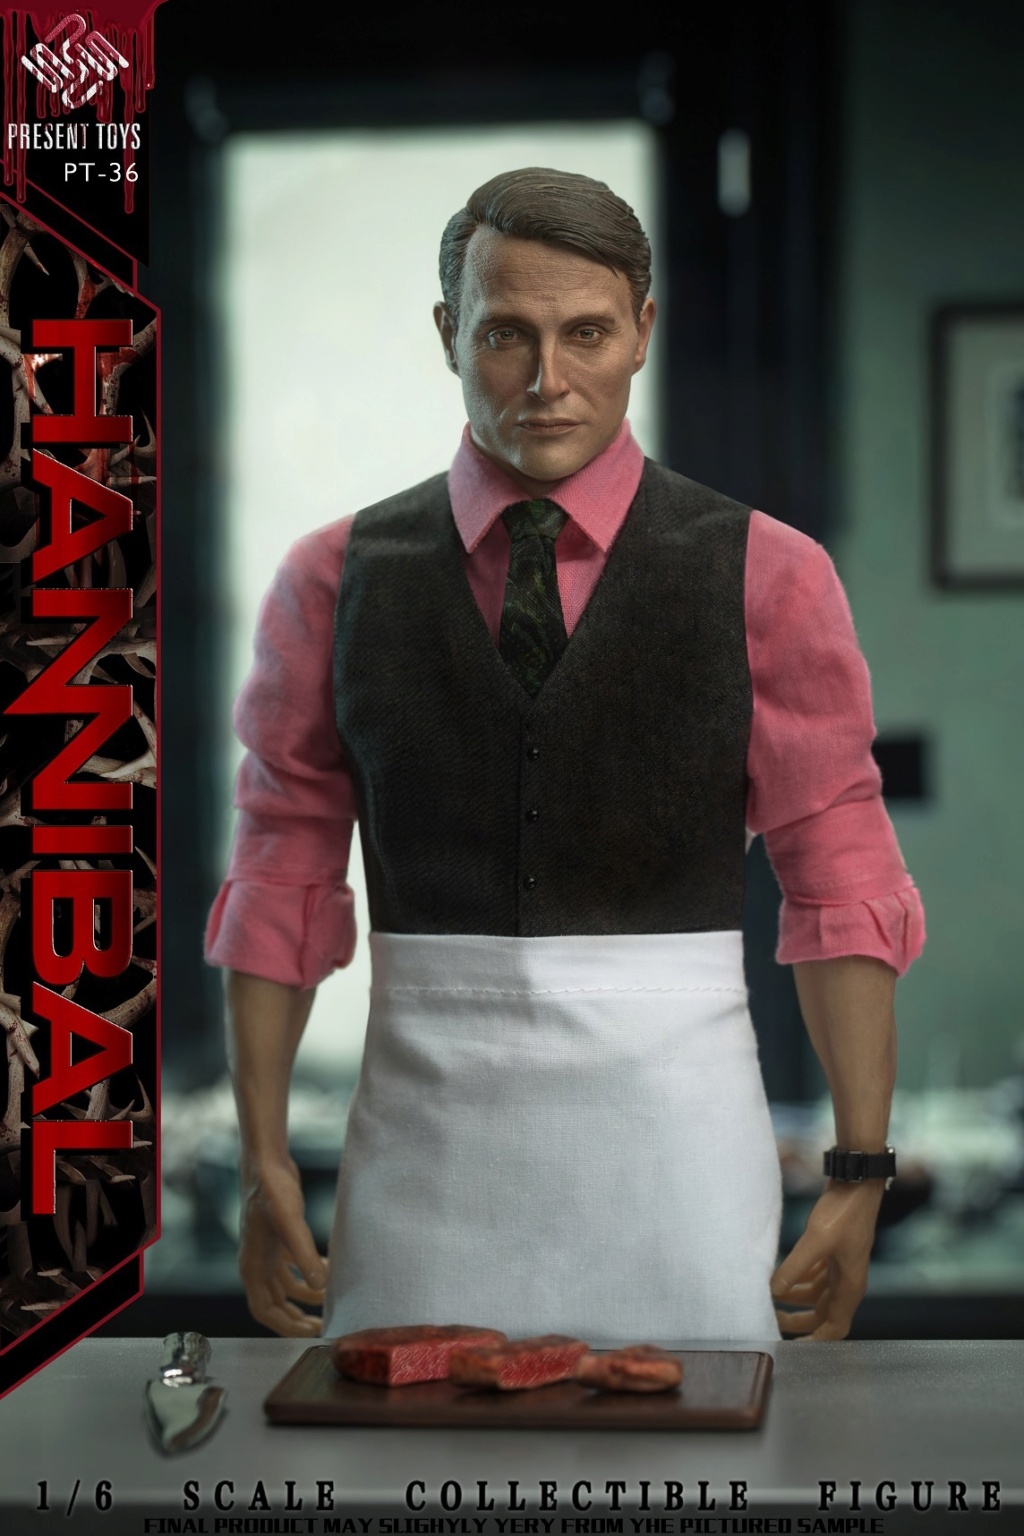 Hannibal - NEW PRODUCT: PRESENT TOYS: 1/6 Hannibal Action Figure #PT-sp36 16523410